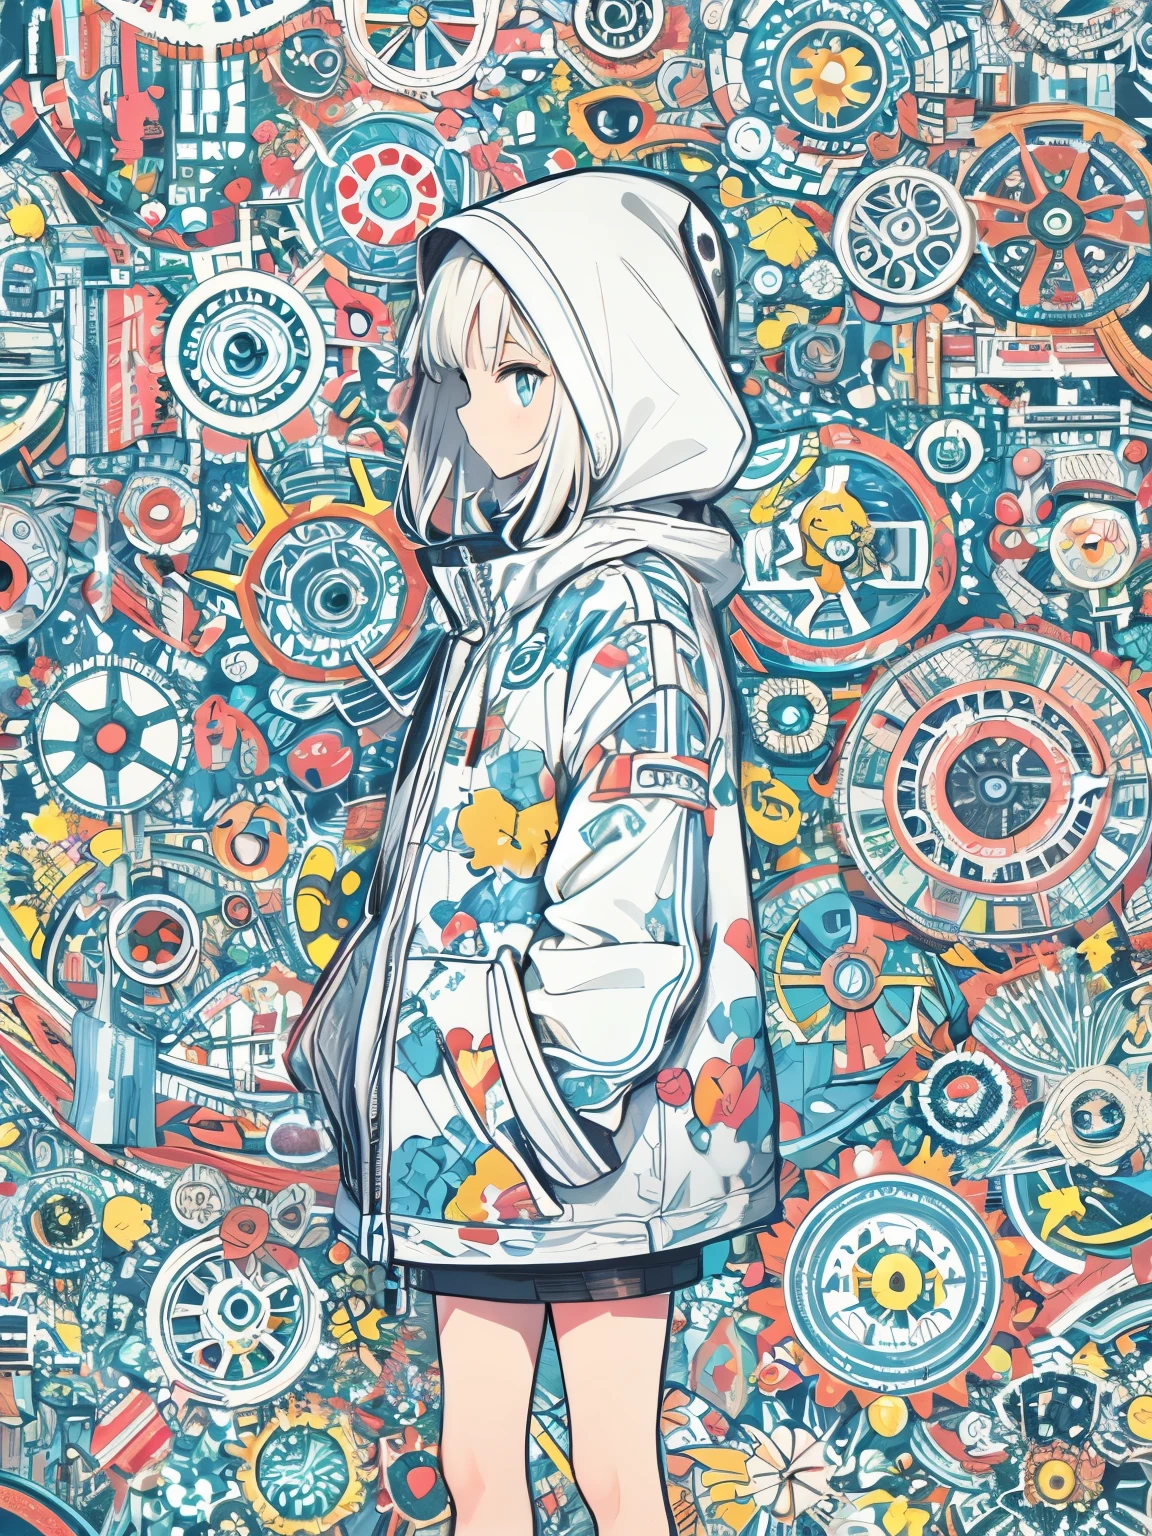 Stylized anime illustration BREAK Profile focused on background character BREAK Short white haired character wearing a large hooded jacket, BREAK looking sideways with a calm expression A complex background made up of mechanical gears and cogs in a variety of soft colors, Create complex but harmonious mosaics